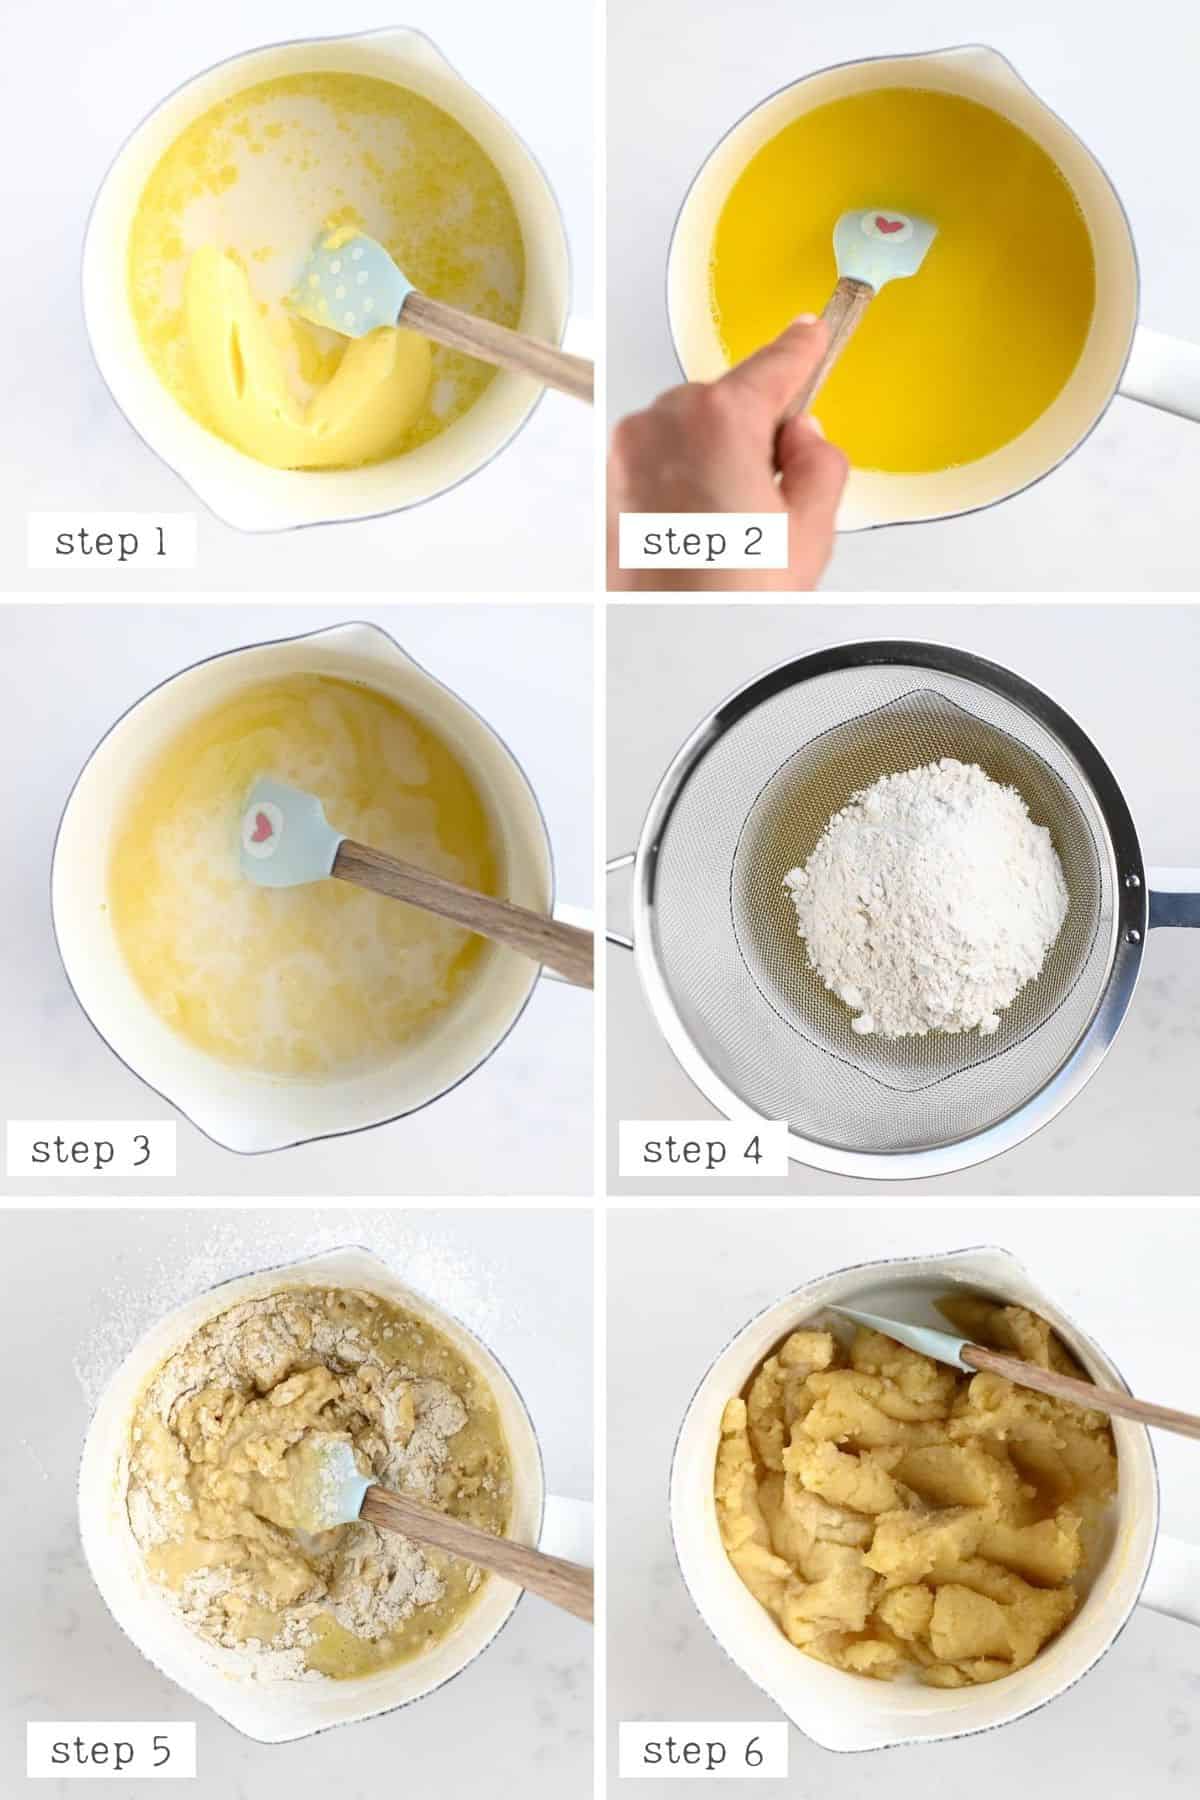 Steps for making choux pastry dough